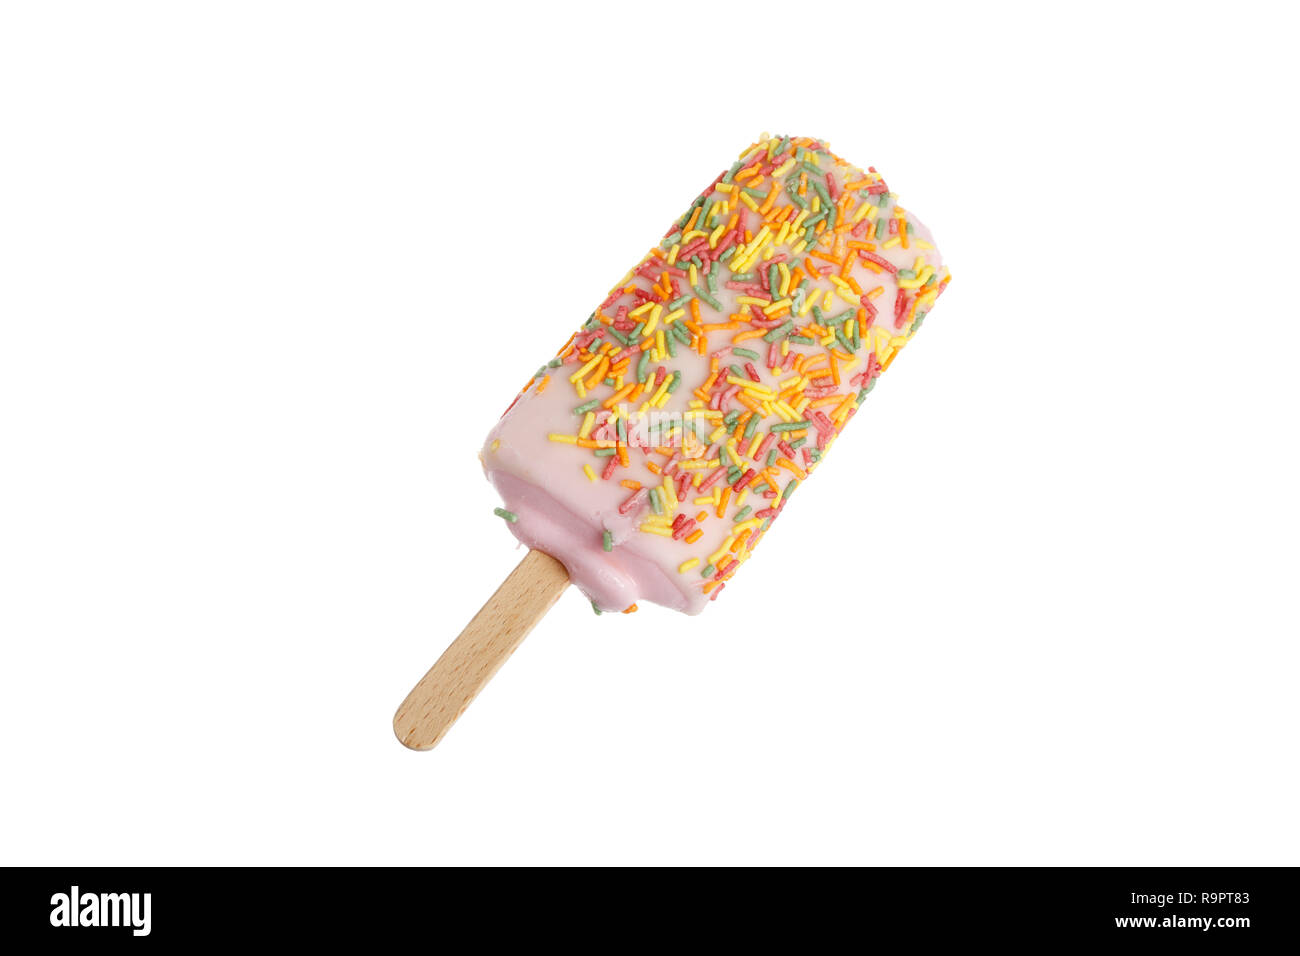 One ice cream lolly covered with sprinkles isoclated on white background. Stock Photo